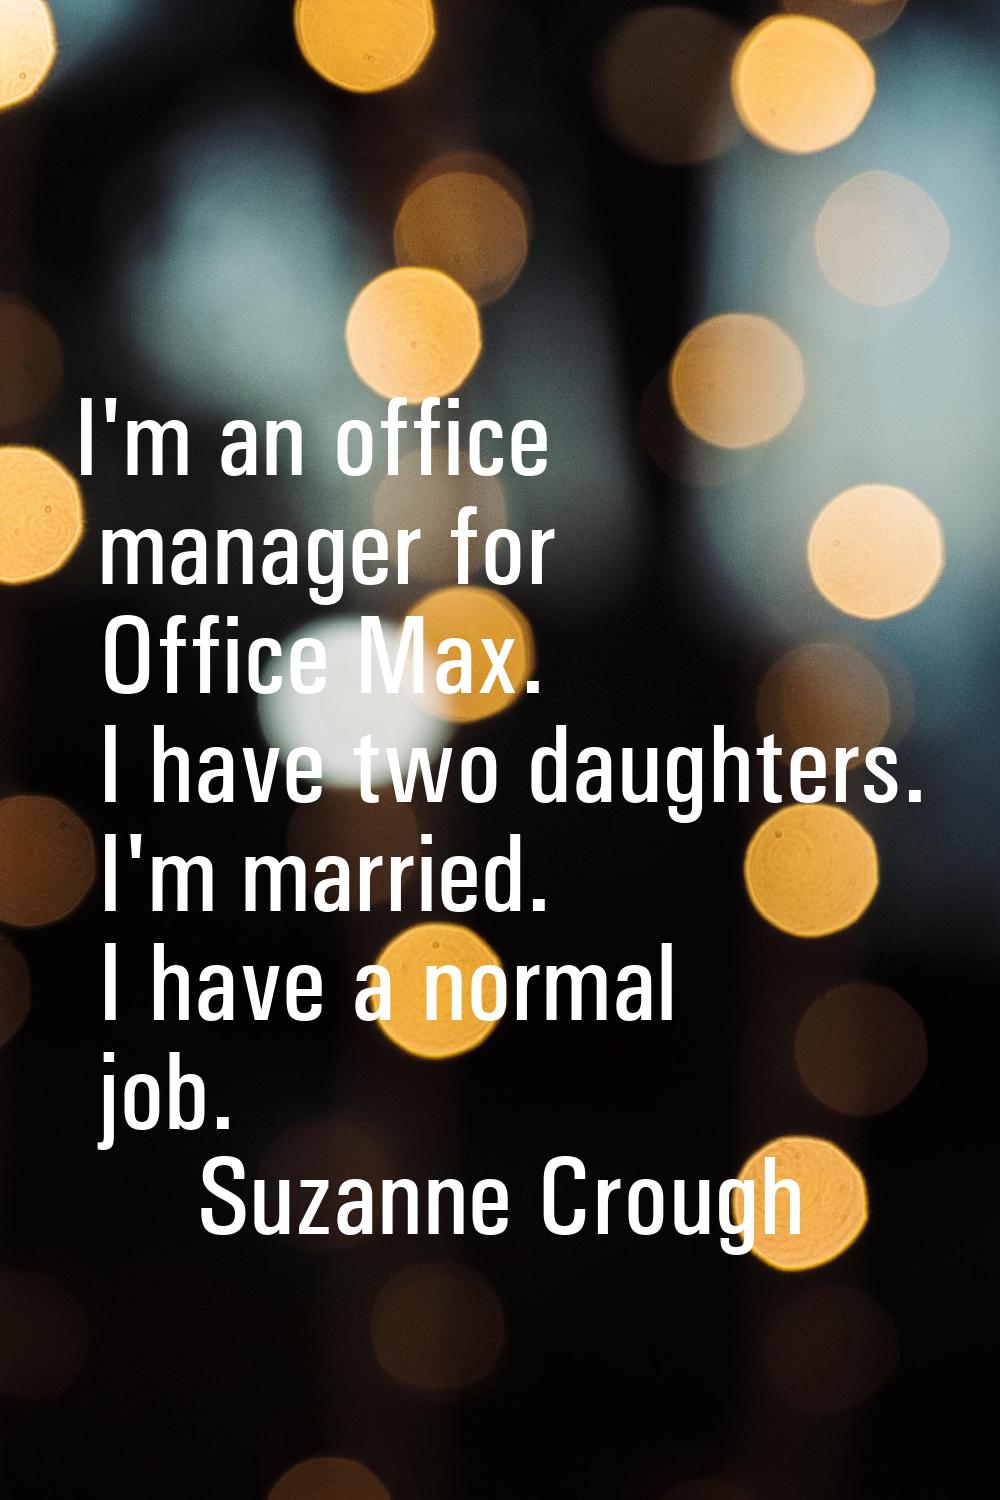 I'm an office manager for Office Max. I have two daughters. I'm married. I have a normal job.